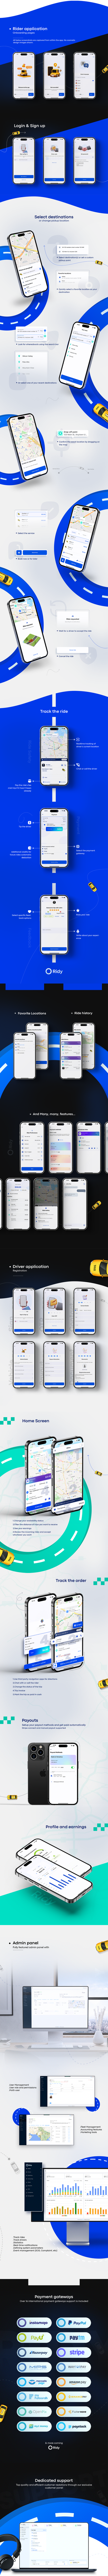 Ridy Taxi Applcation - Complete Taxi Solution with Admin Panel - 9